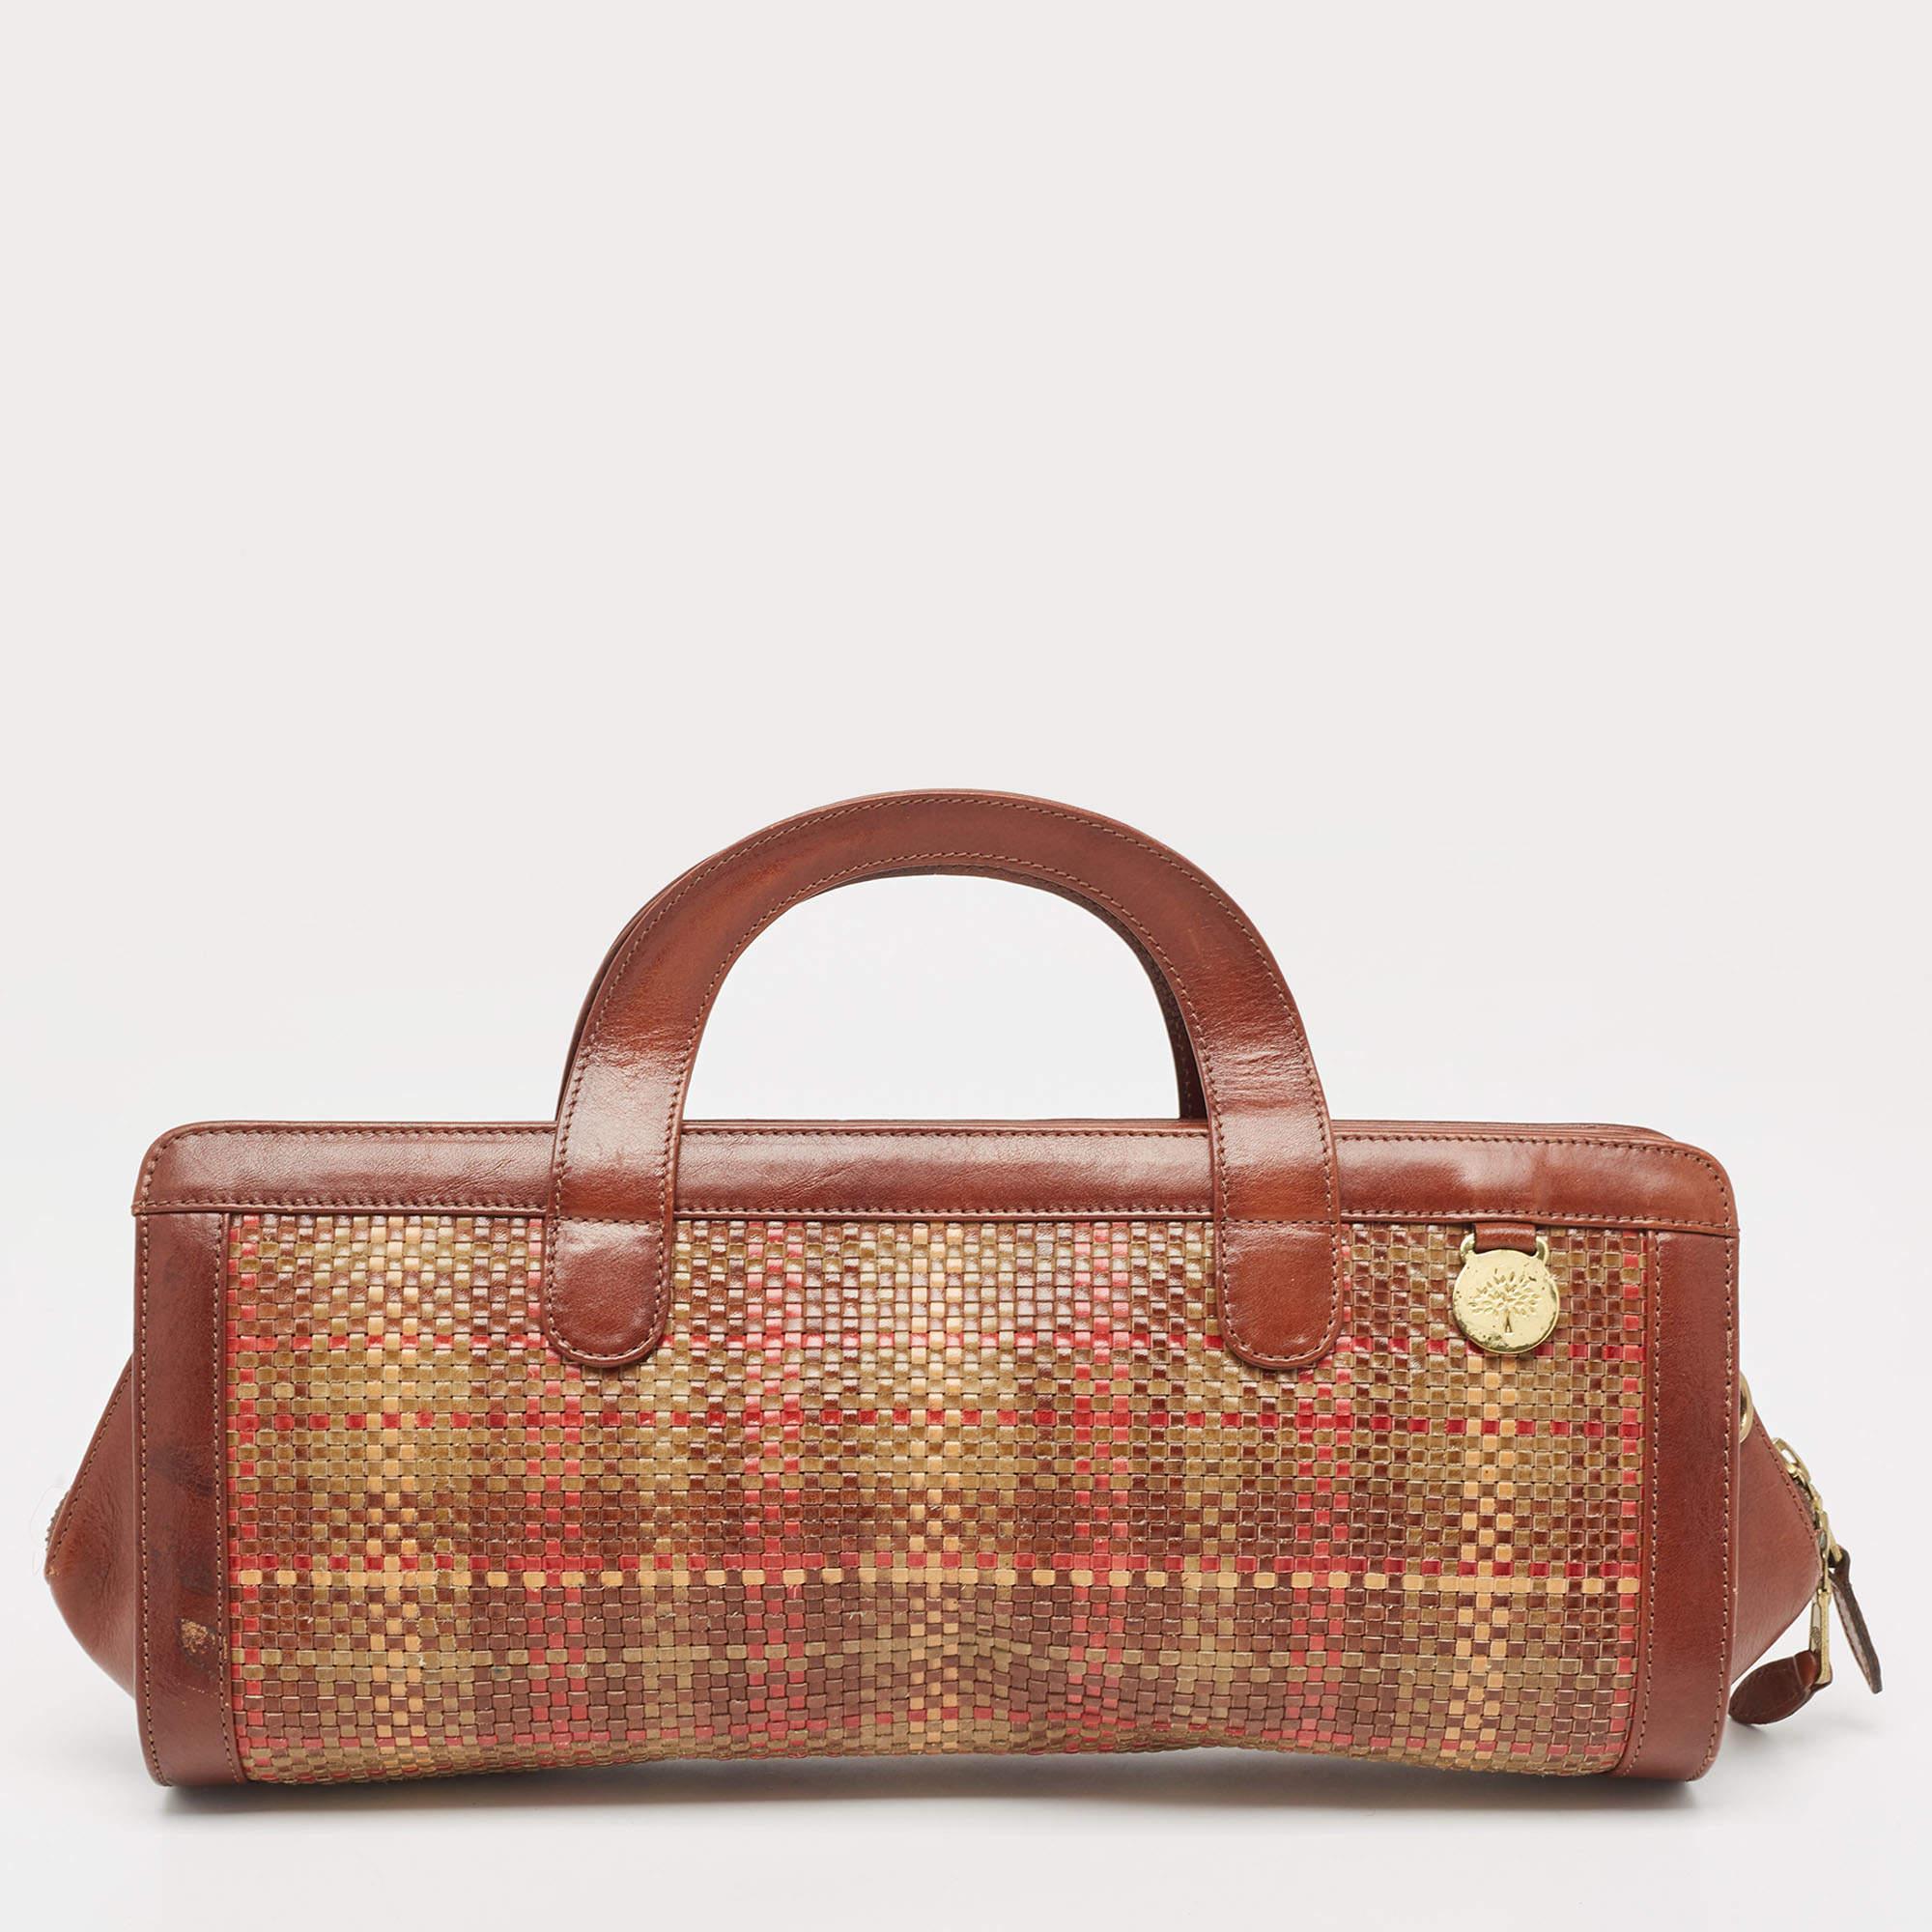 Mulberry Brown/Multicolor Woven Leather Satchel For Sale 7